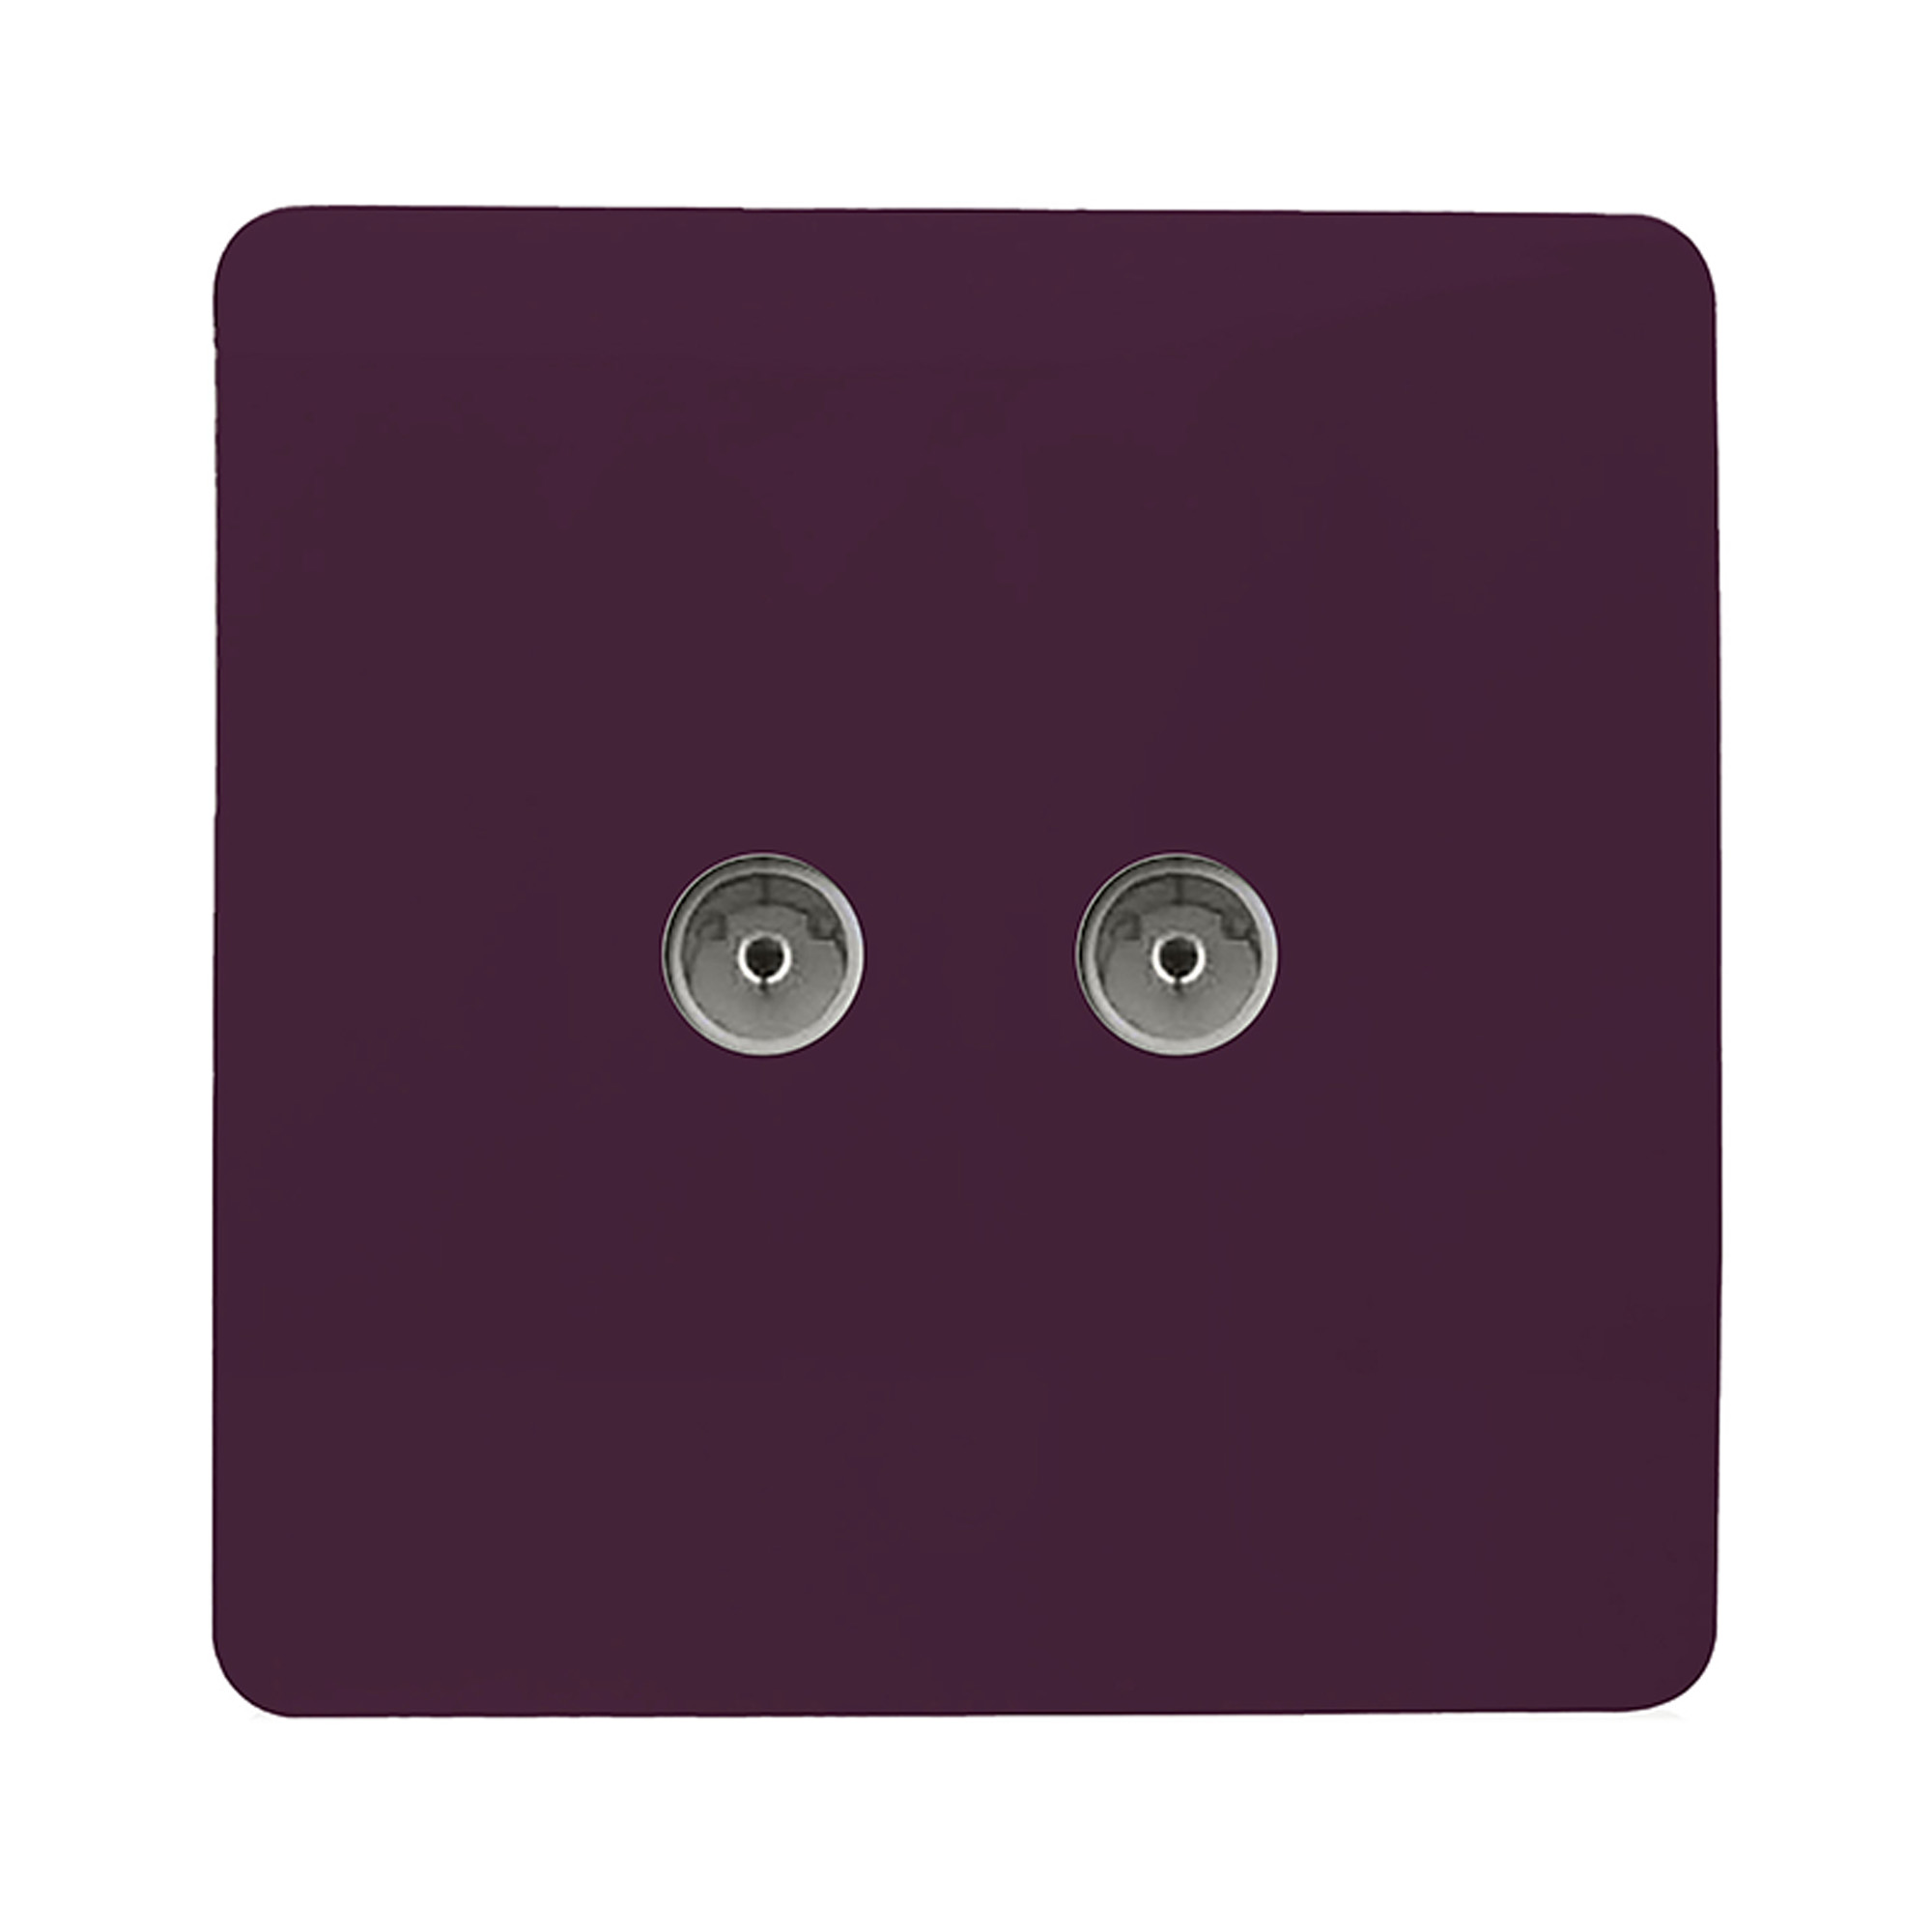 ART-2TVSPL  Twin TV Co-Axial Outlet Plum